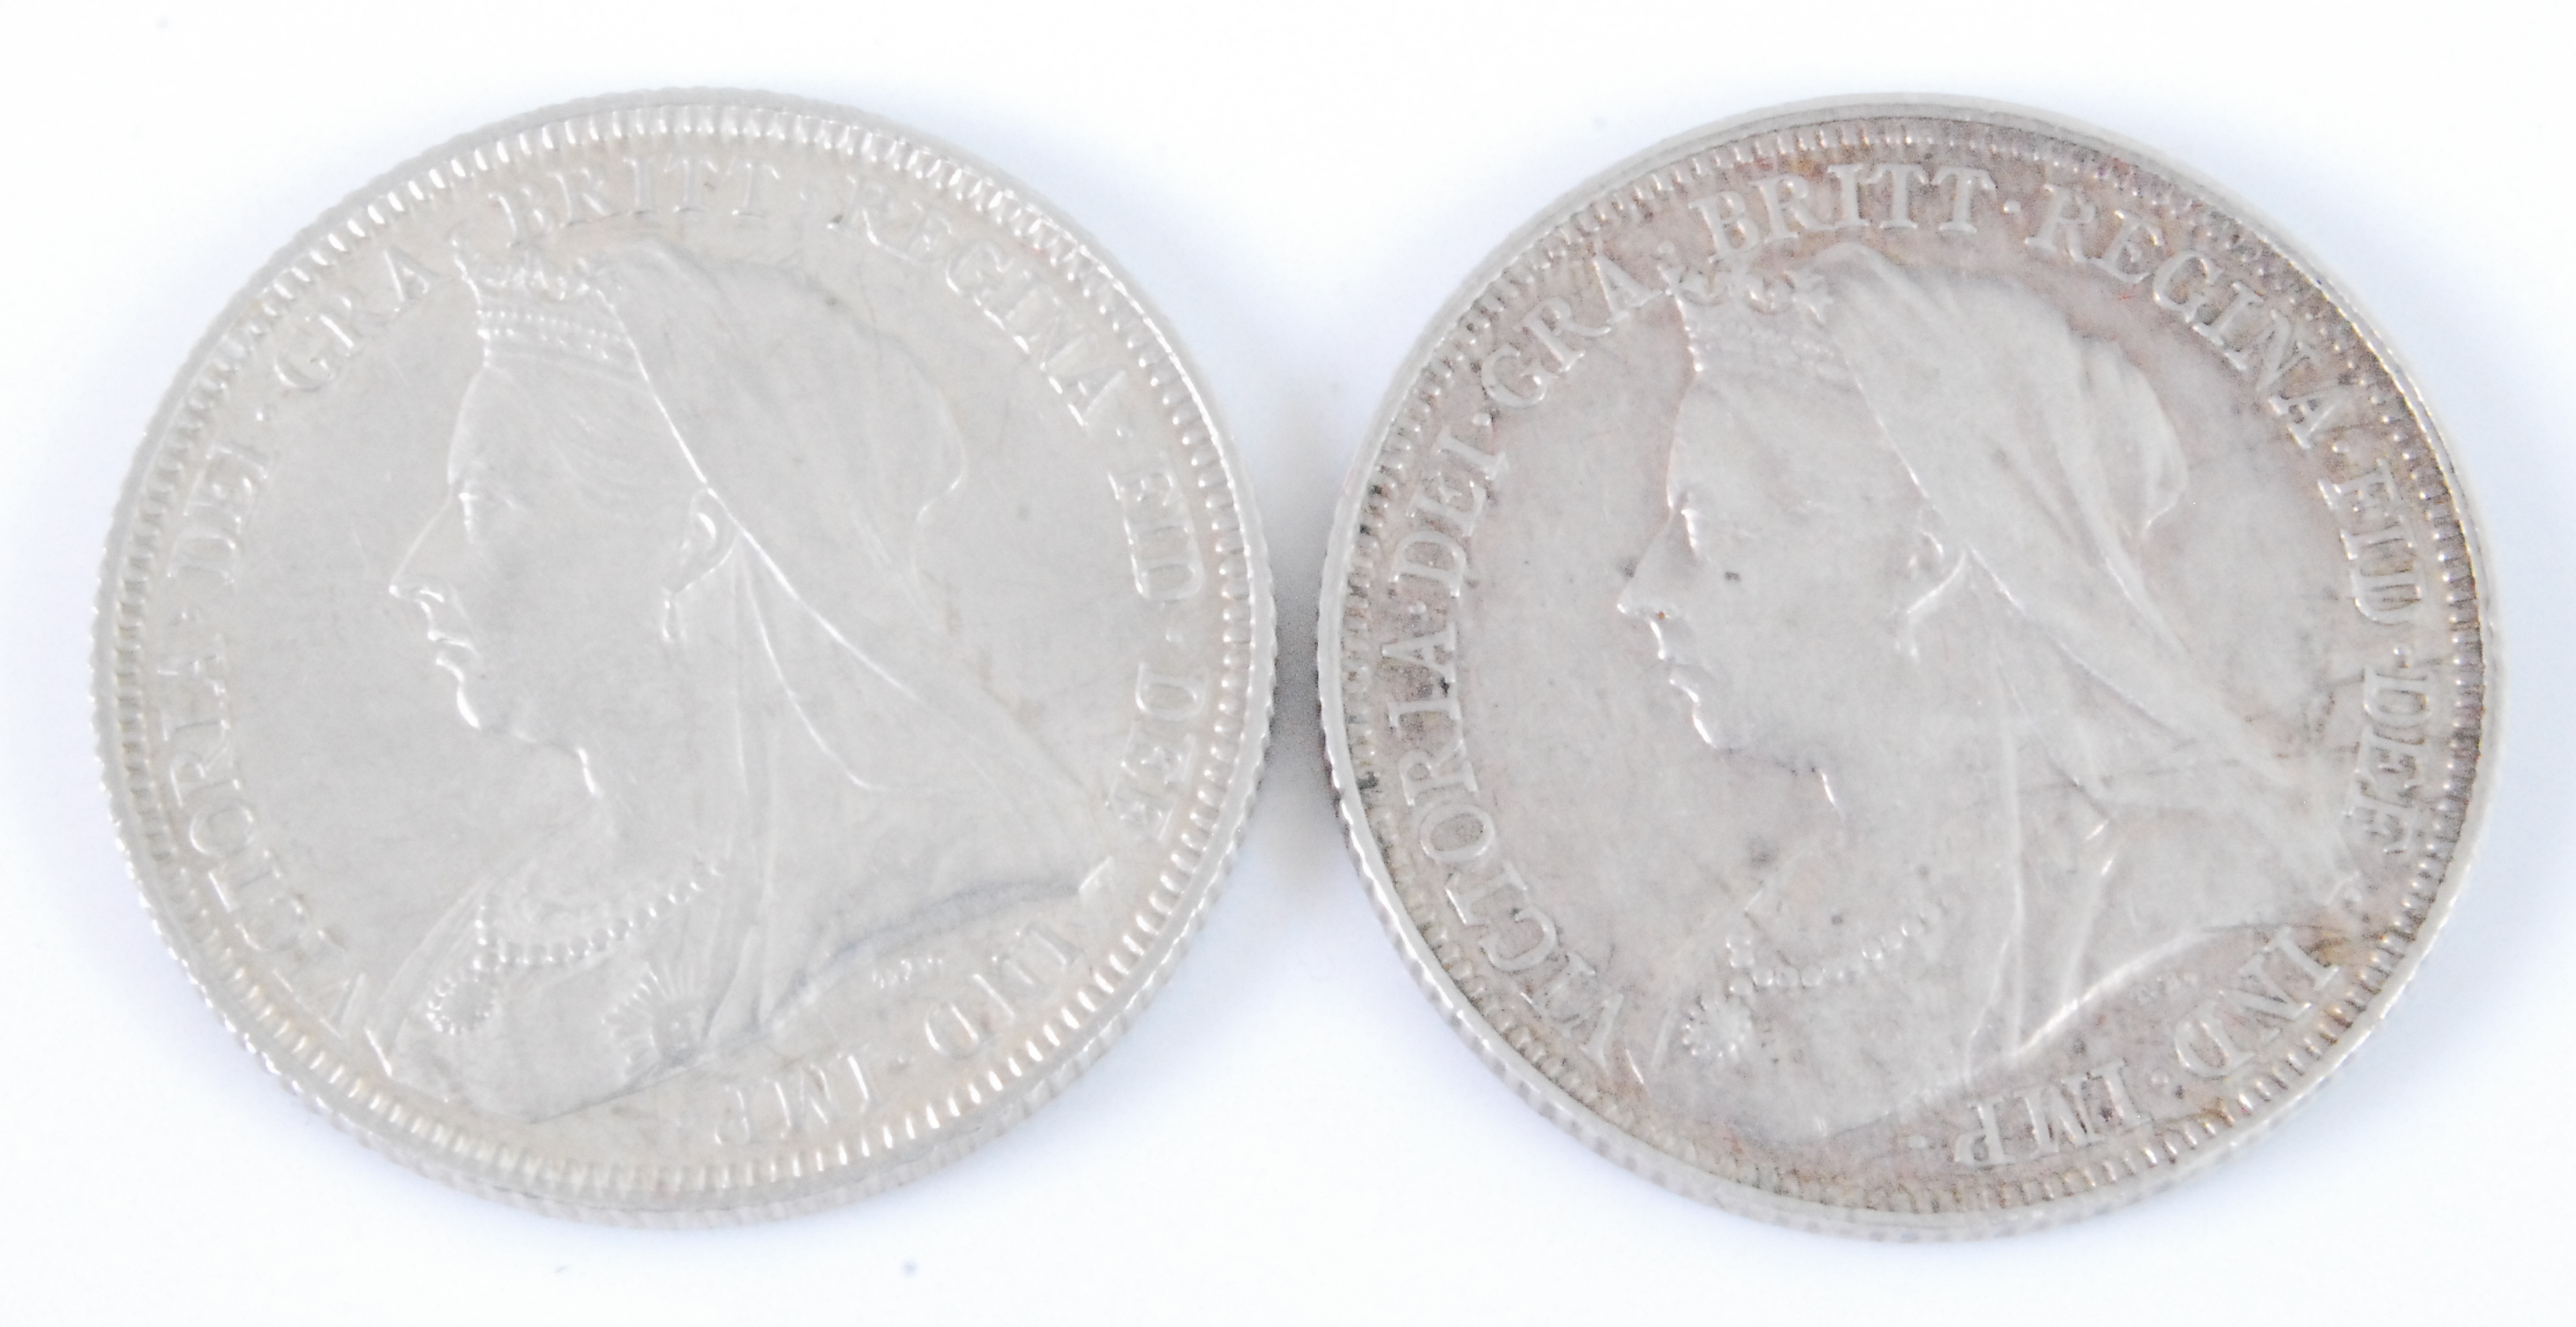 Great Britain, 1893 shilling, Victoria "veiled" head, rev; three crowned shields within garter